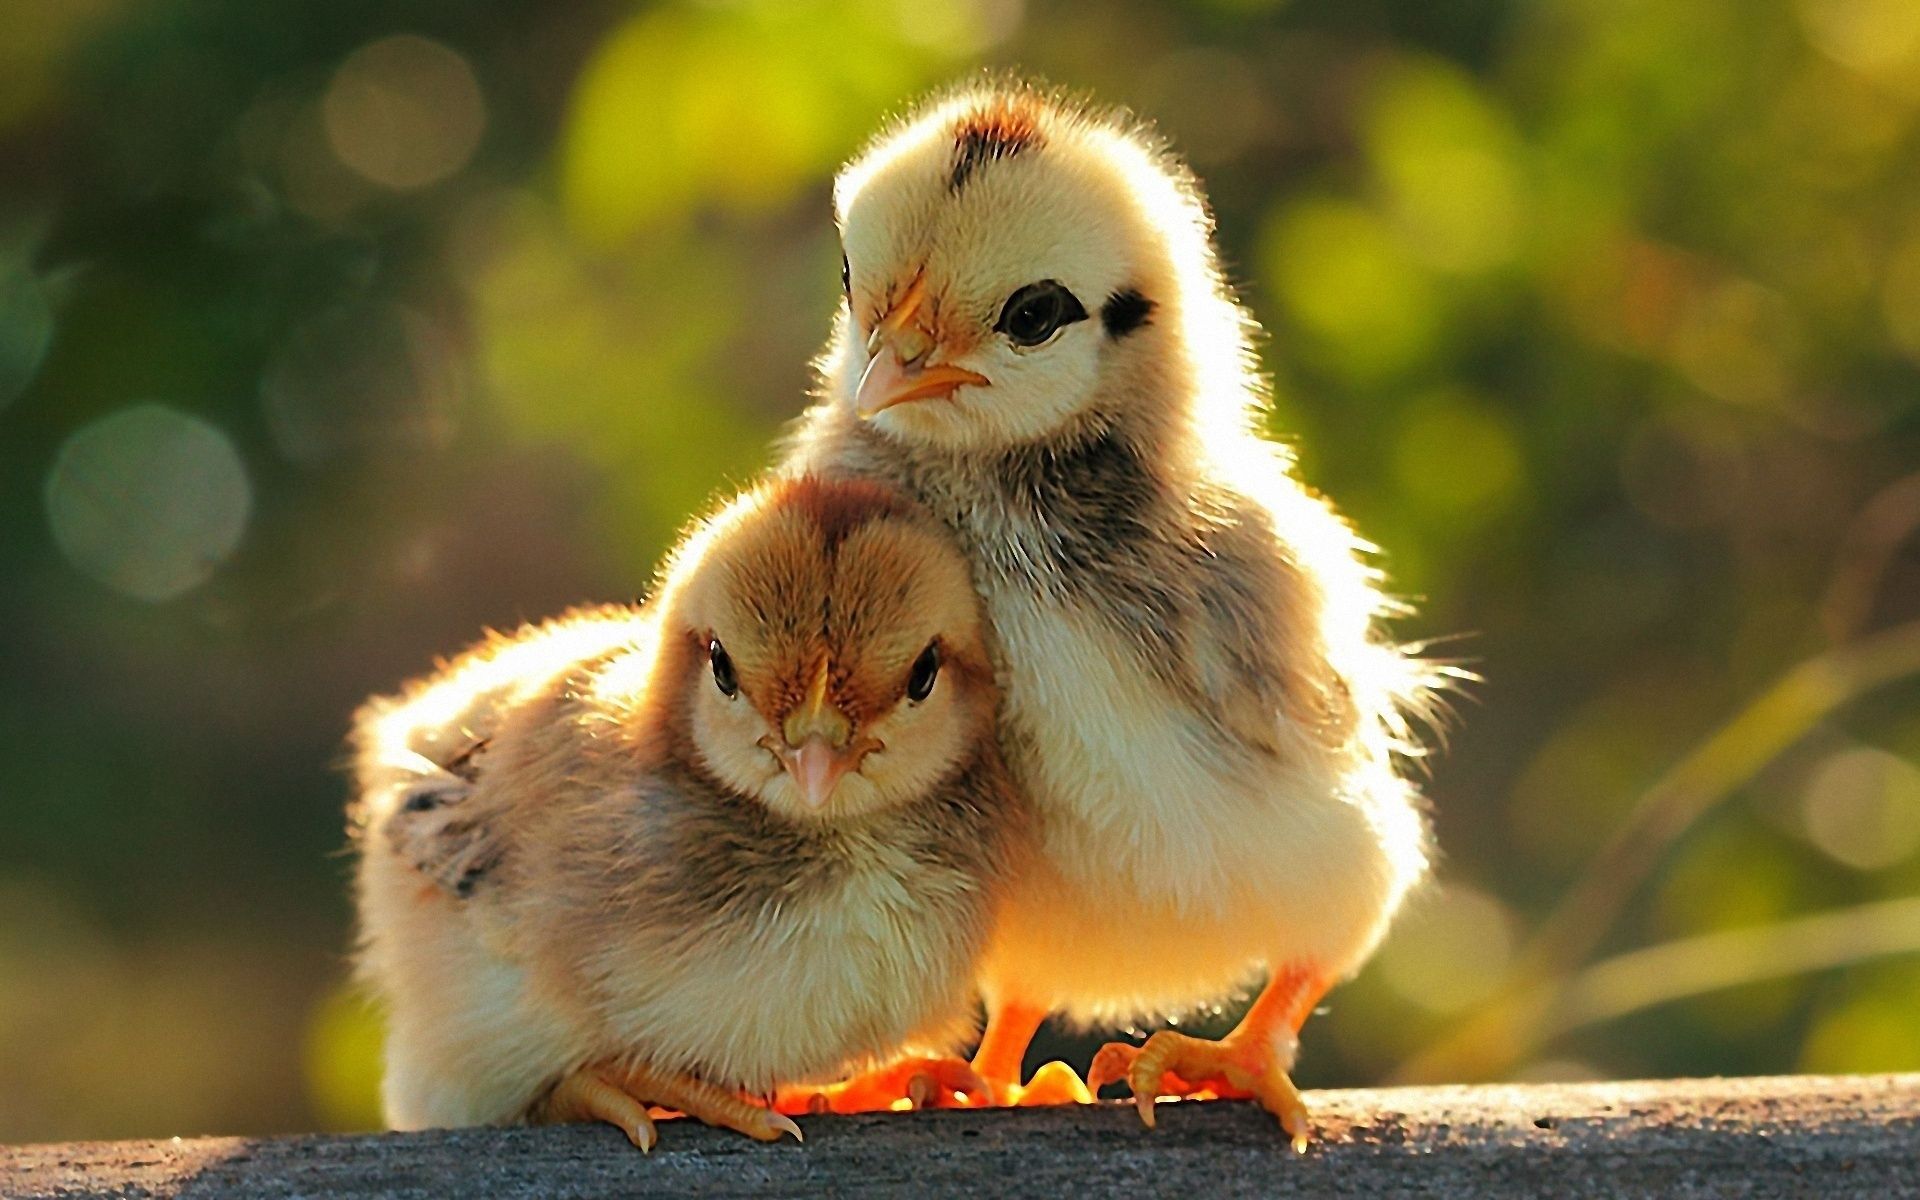 Animals-Birds-Little-Chickens-Free-Download | No kidding! These cute ...